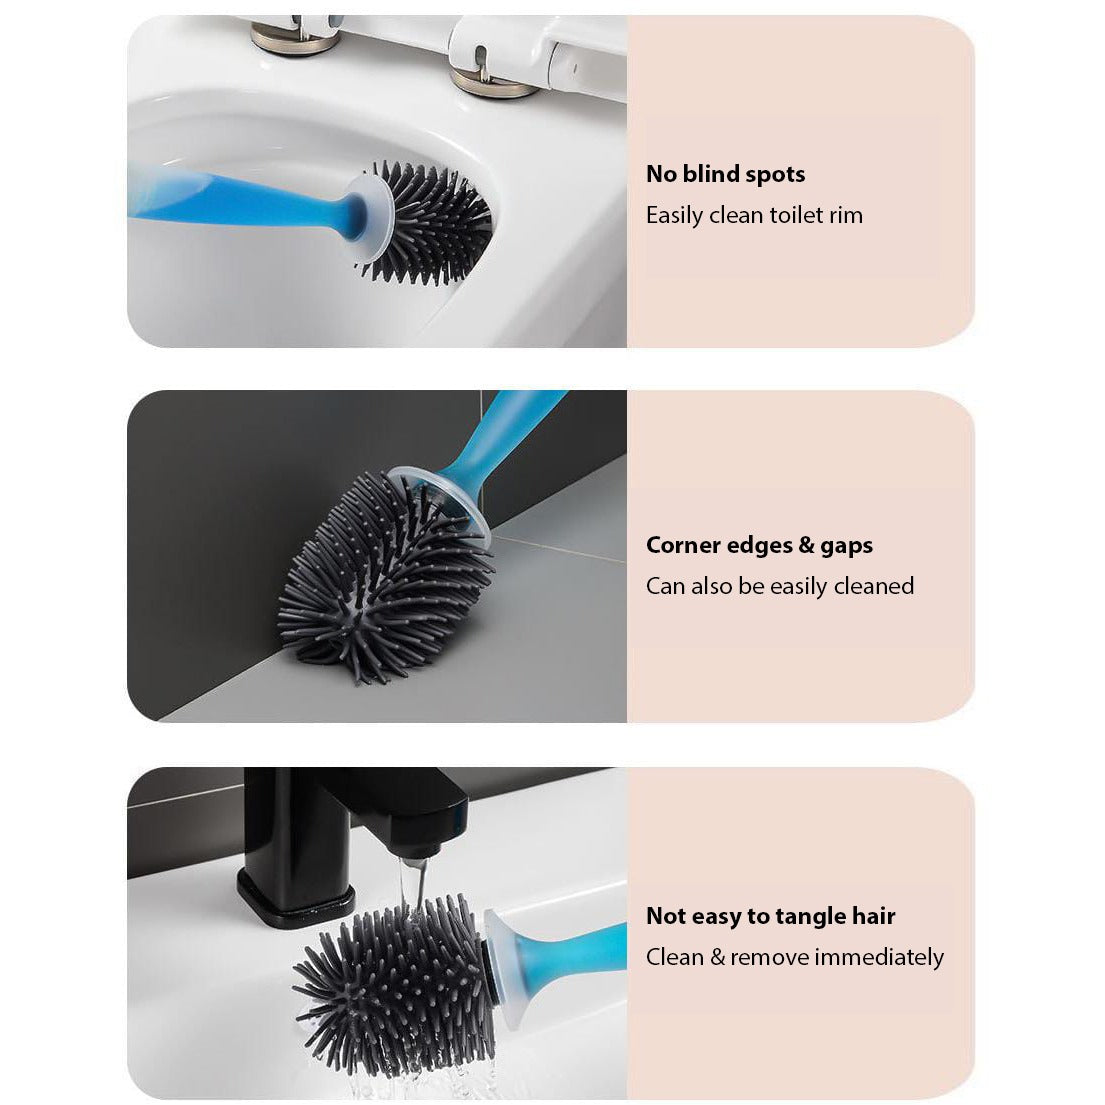 Refillable Toilet Cleaning Brush is Used to Clean Toilet.